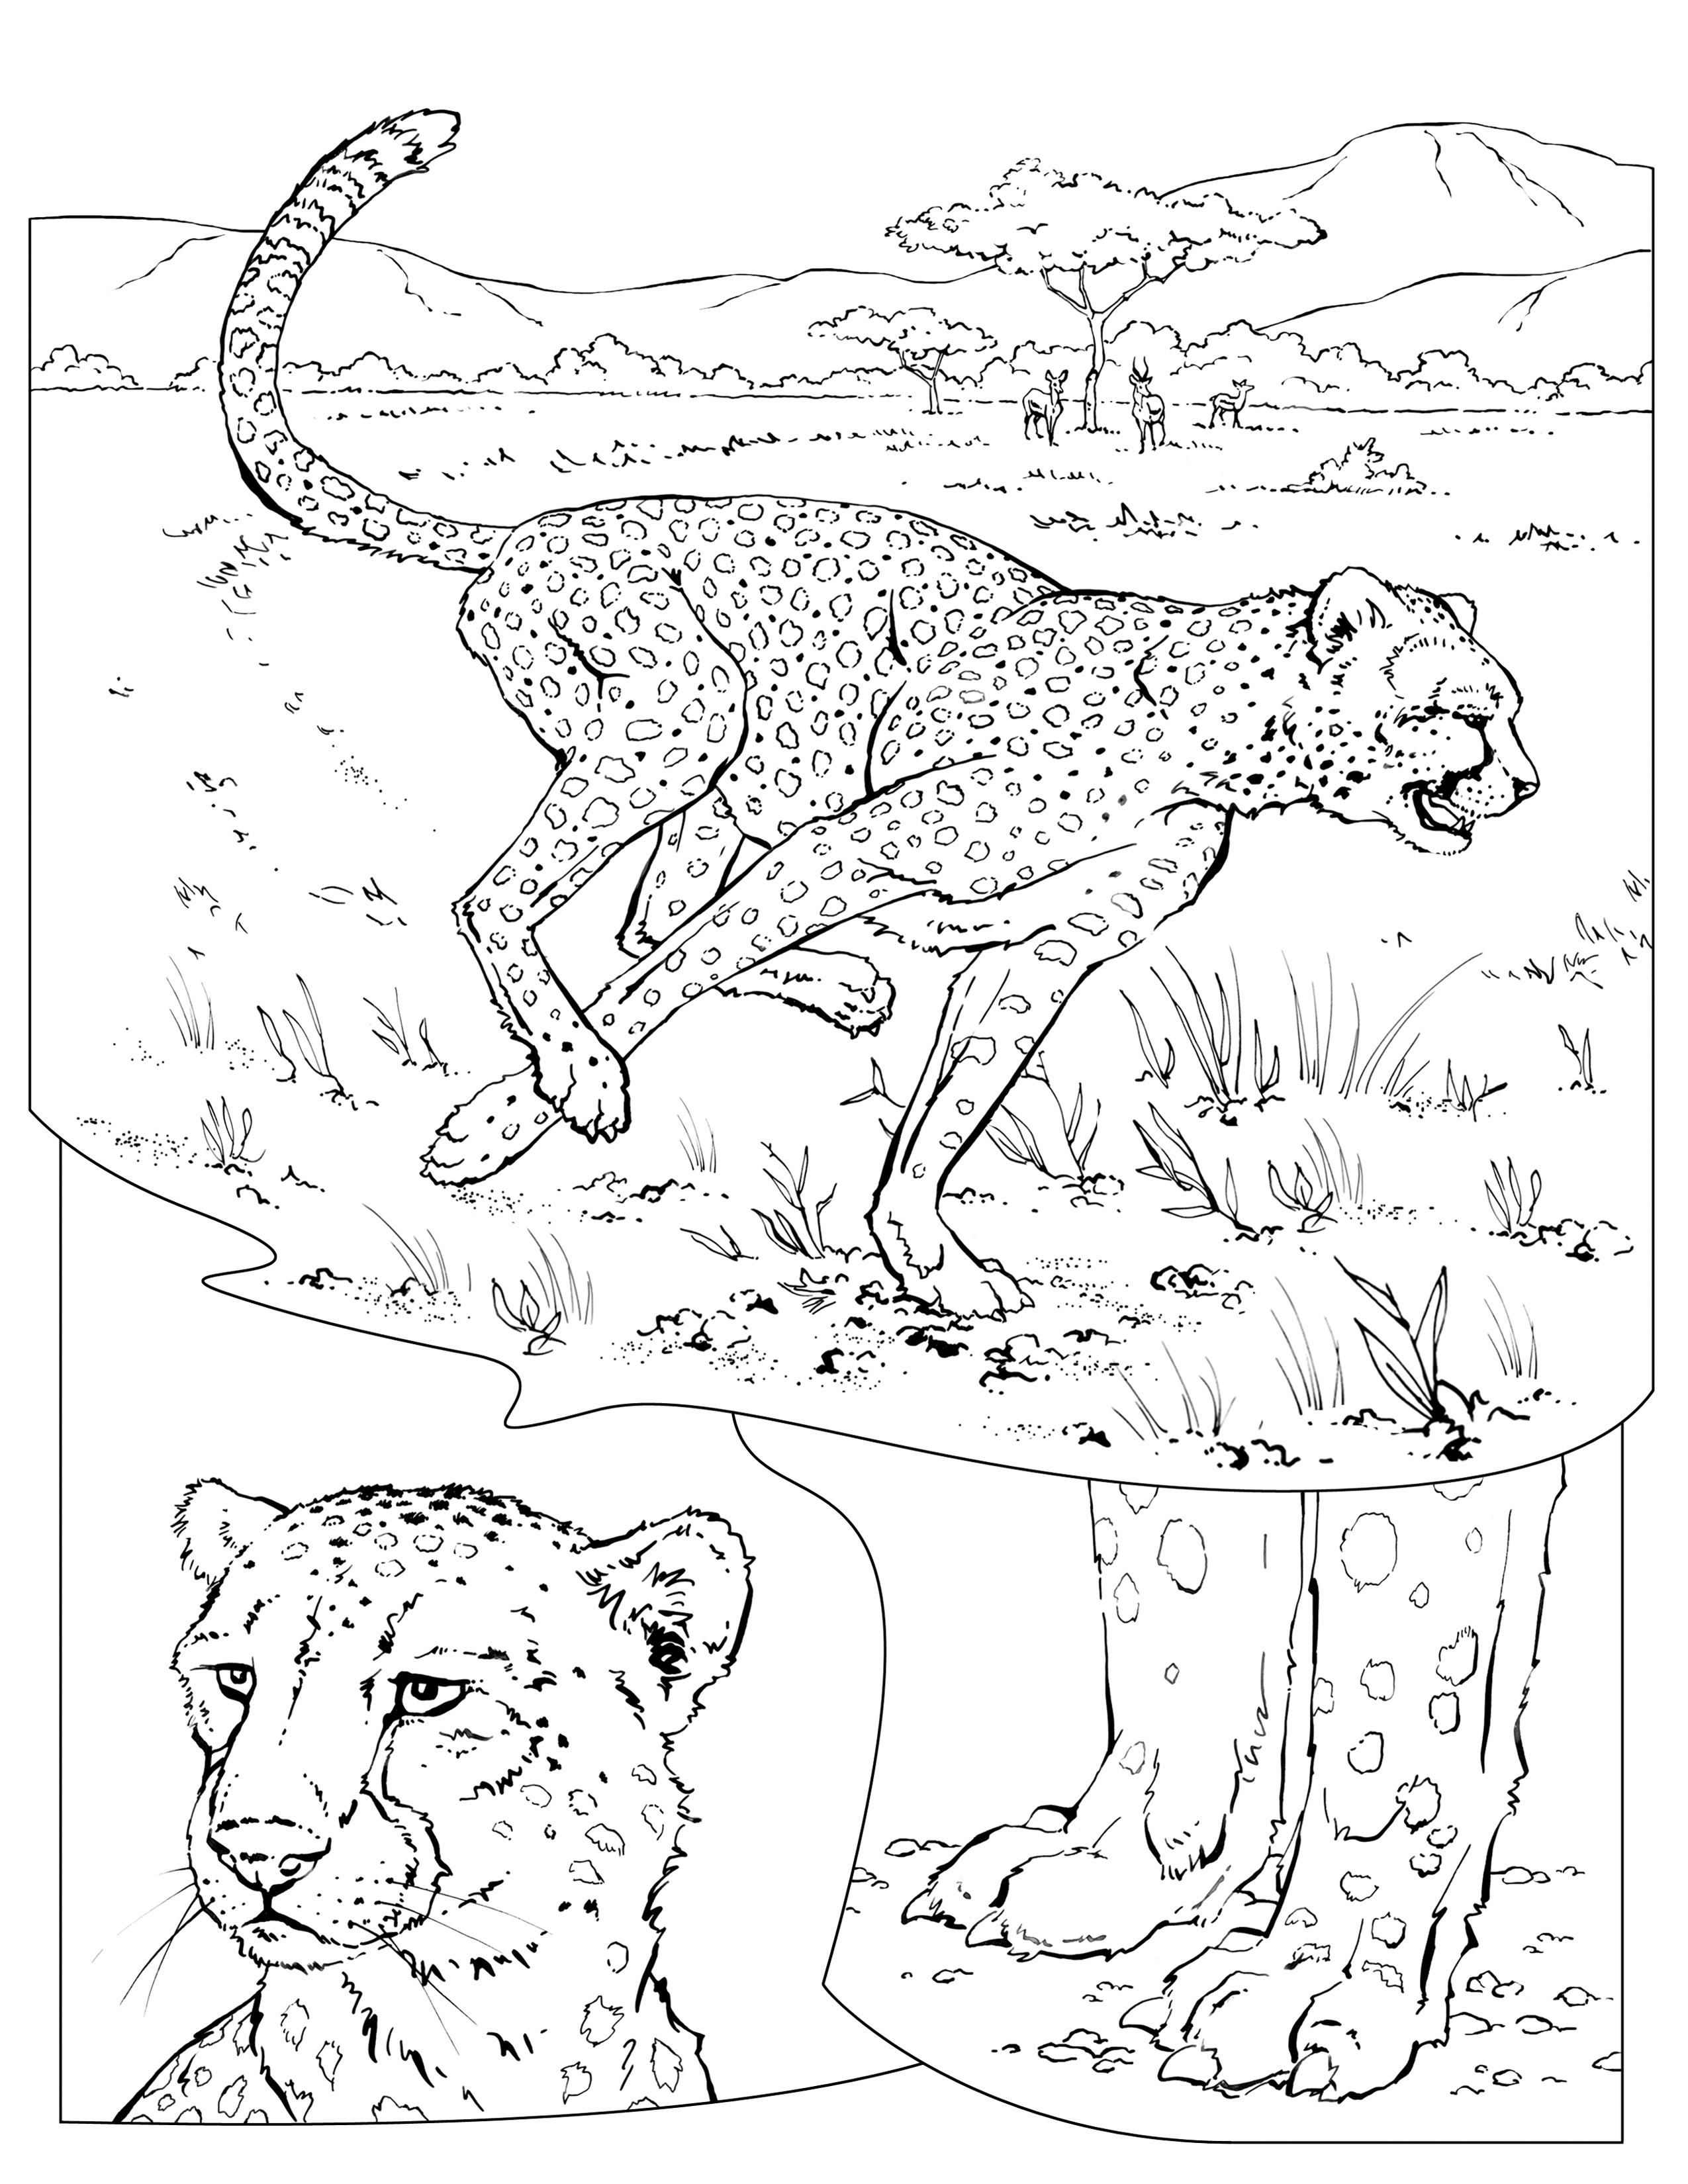 Cheetah coloring pages to download and print for free